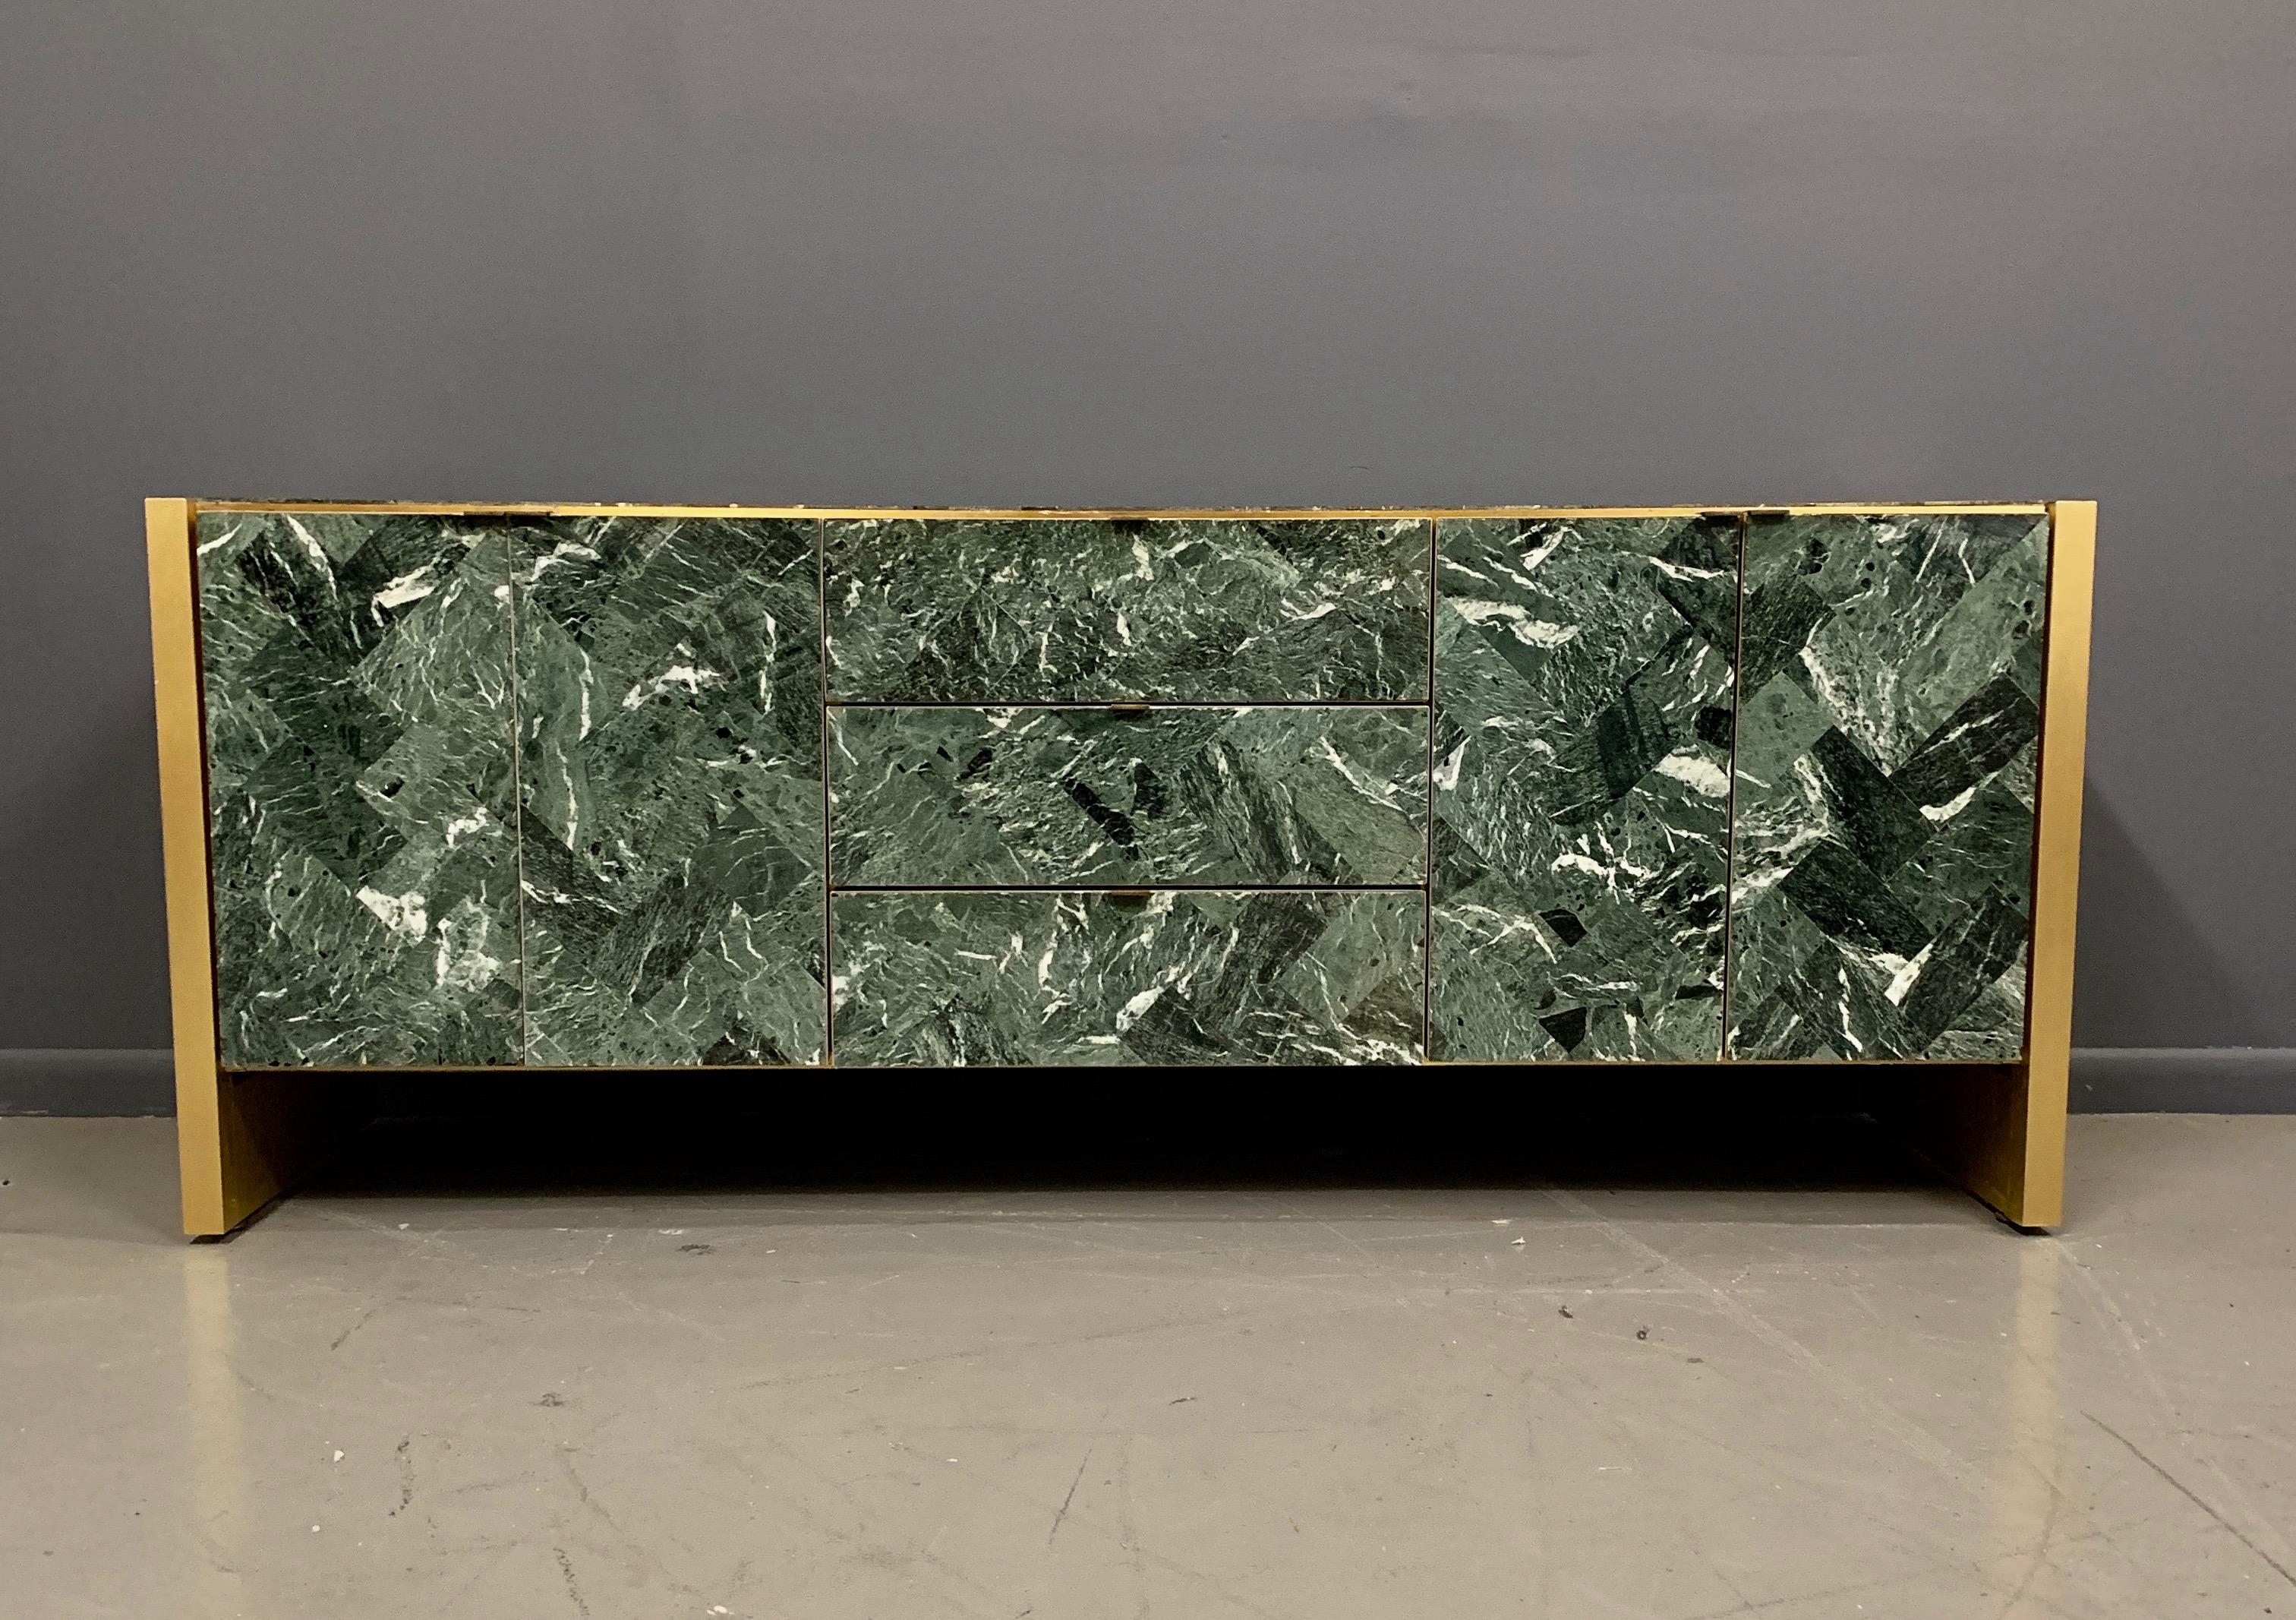 Beautiful green marble pattern is complimented with brushed brass trim and side panels. Built in the way only Ello did in the 1970s and 1980s.

Ello was making these pieces at the same time some of our favorite designers were working, such as: Milo